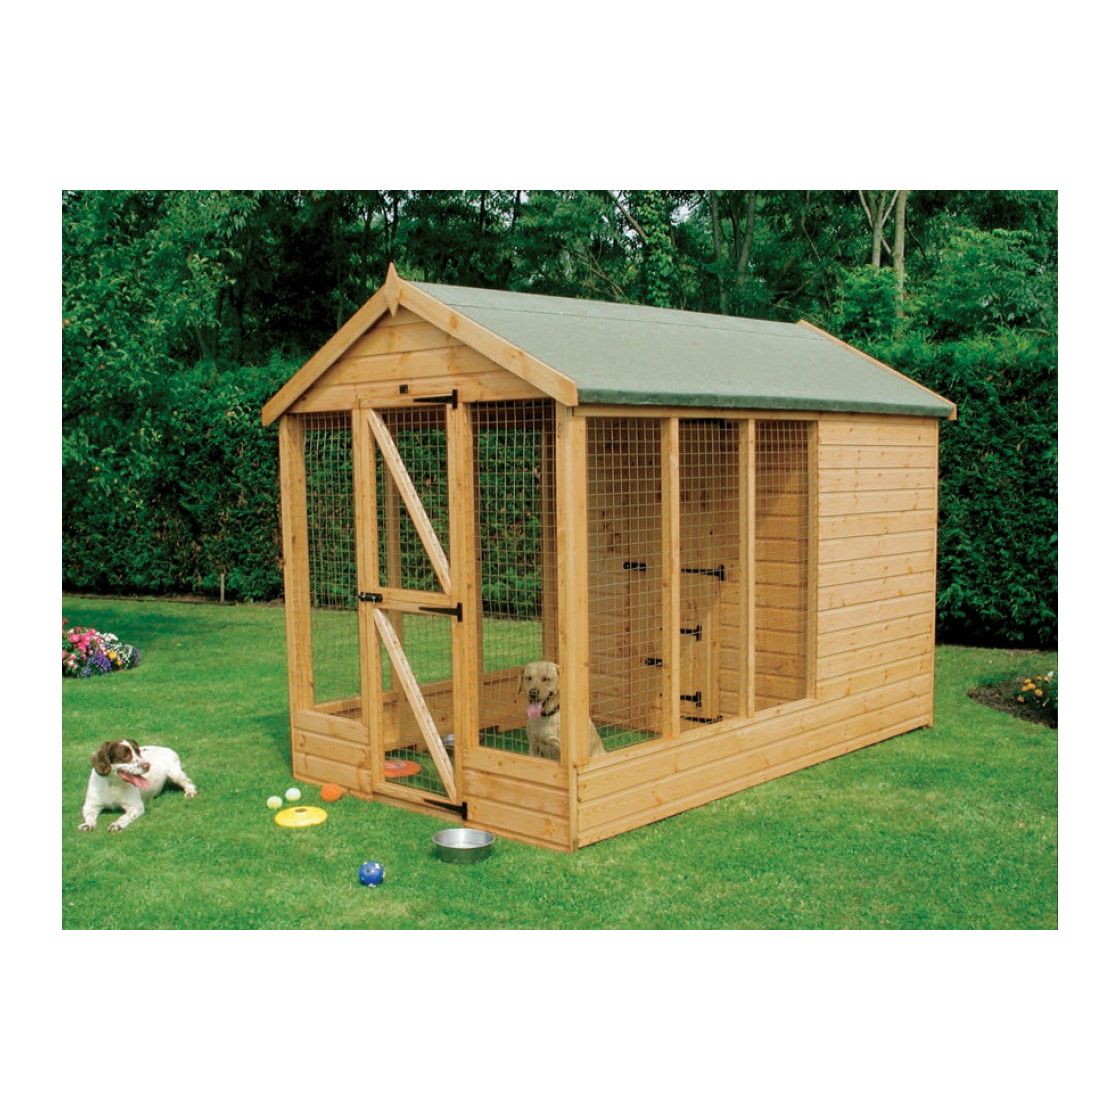 Shedlands 10 x 6 Country Kennel| For Sale - Premium Garden